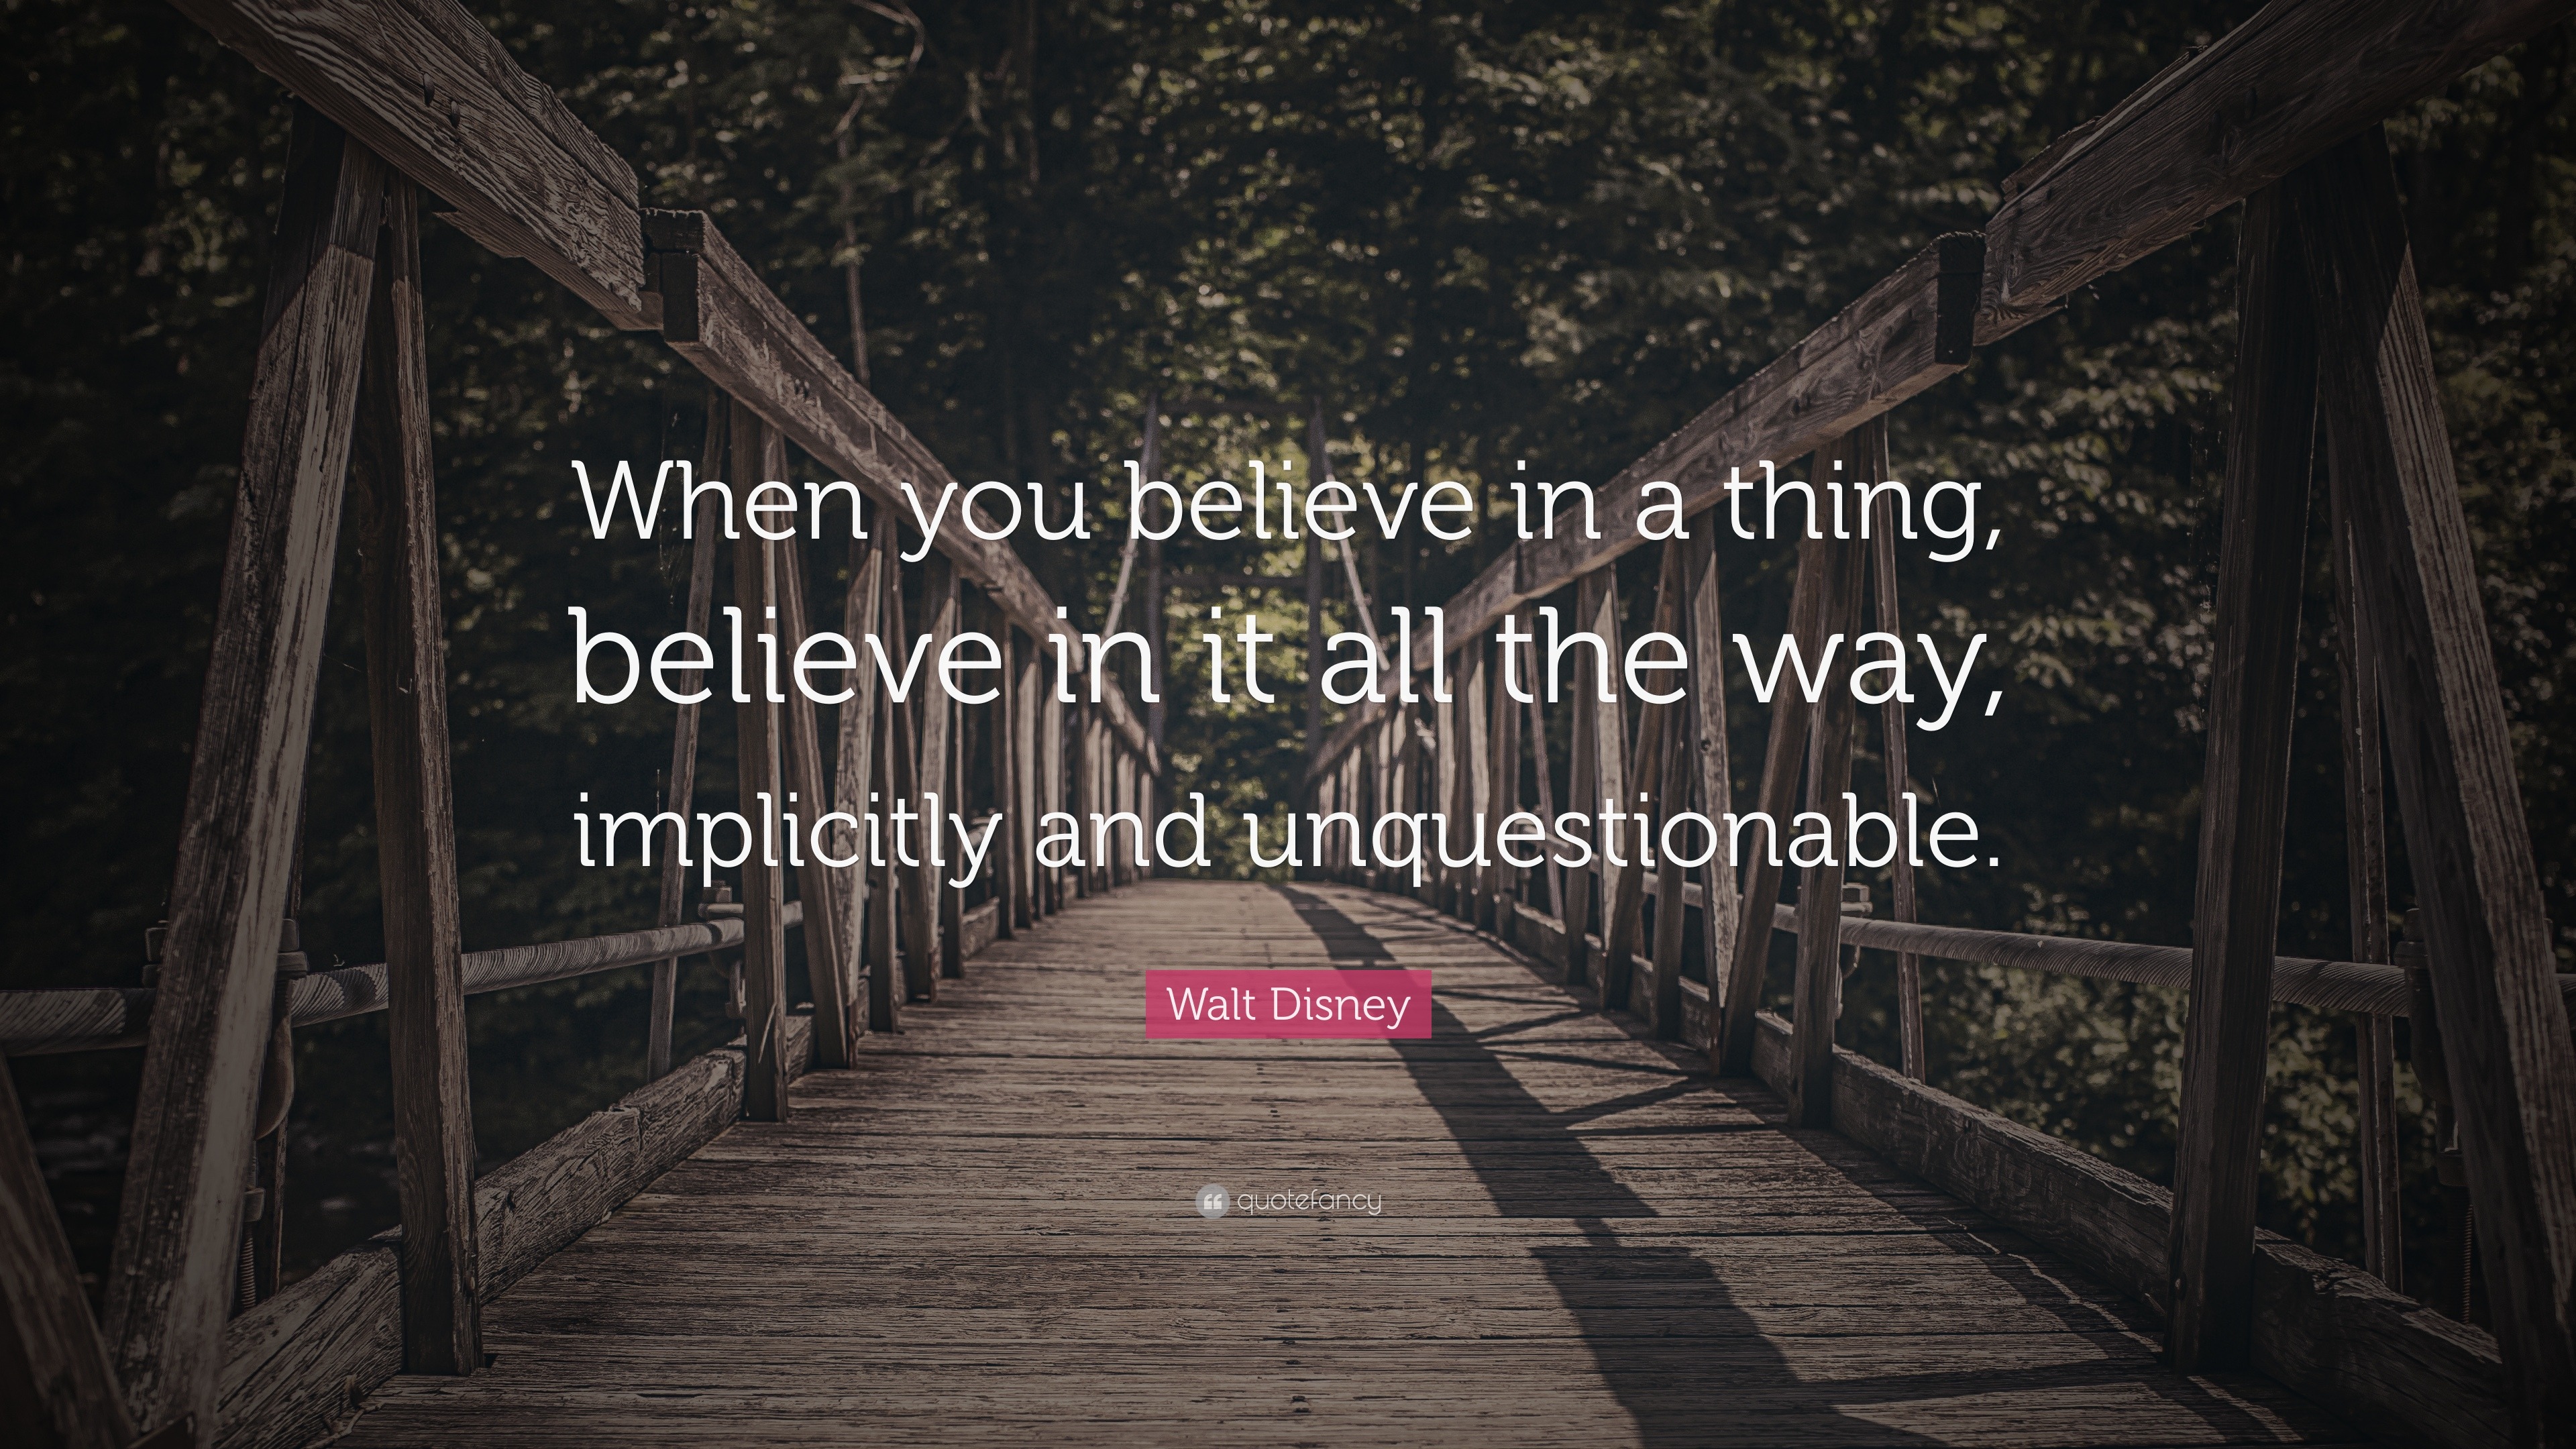 Walt Disney Quote When You Believe In A Thing Believe In It All The Way Implicitly And Unquestionable 23 Wallpapers Quotefancy